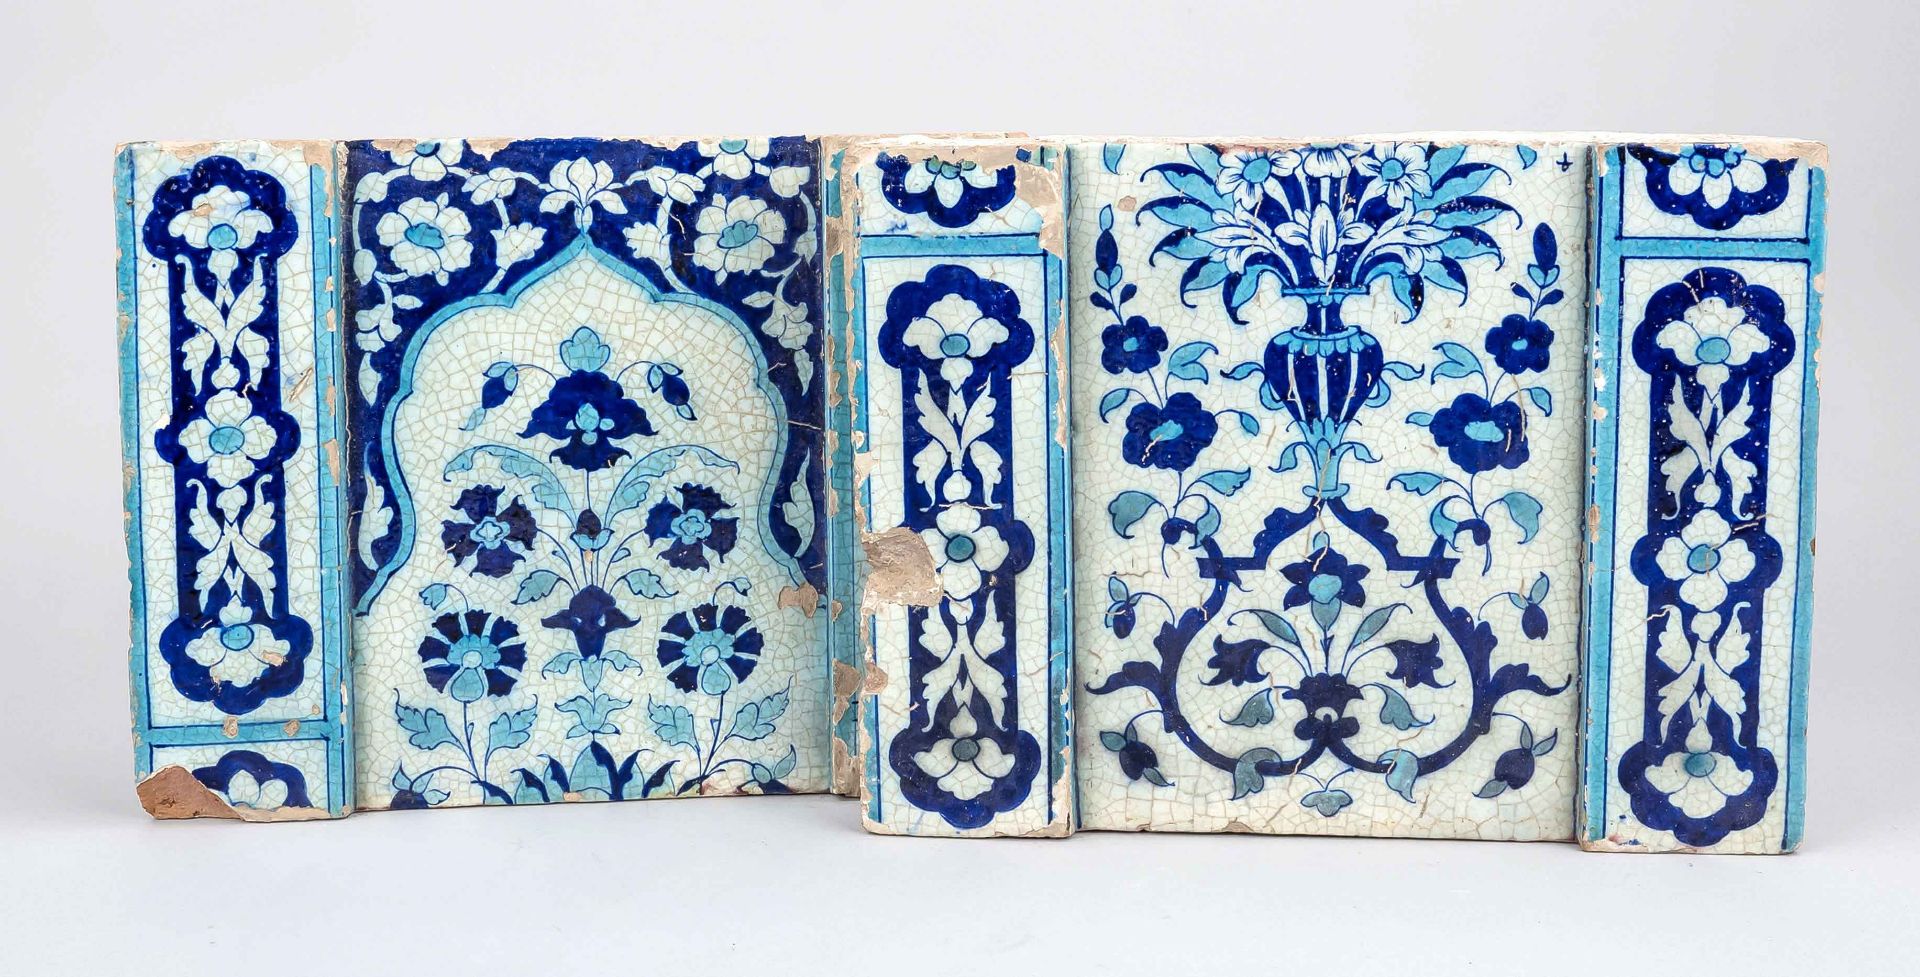 Pair of large Iznik tiles, probably Ottoman Empire 16th century, porcelain with crackled luster